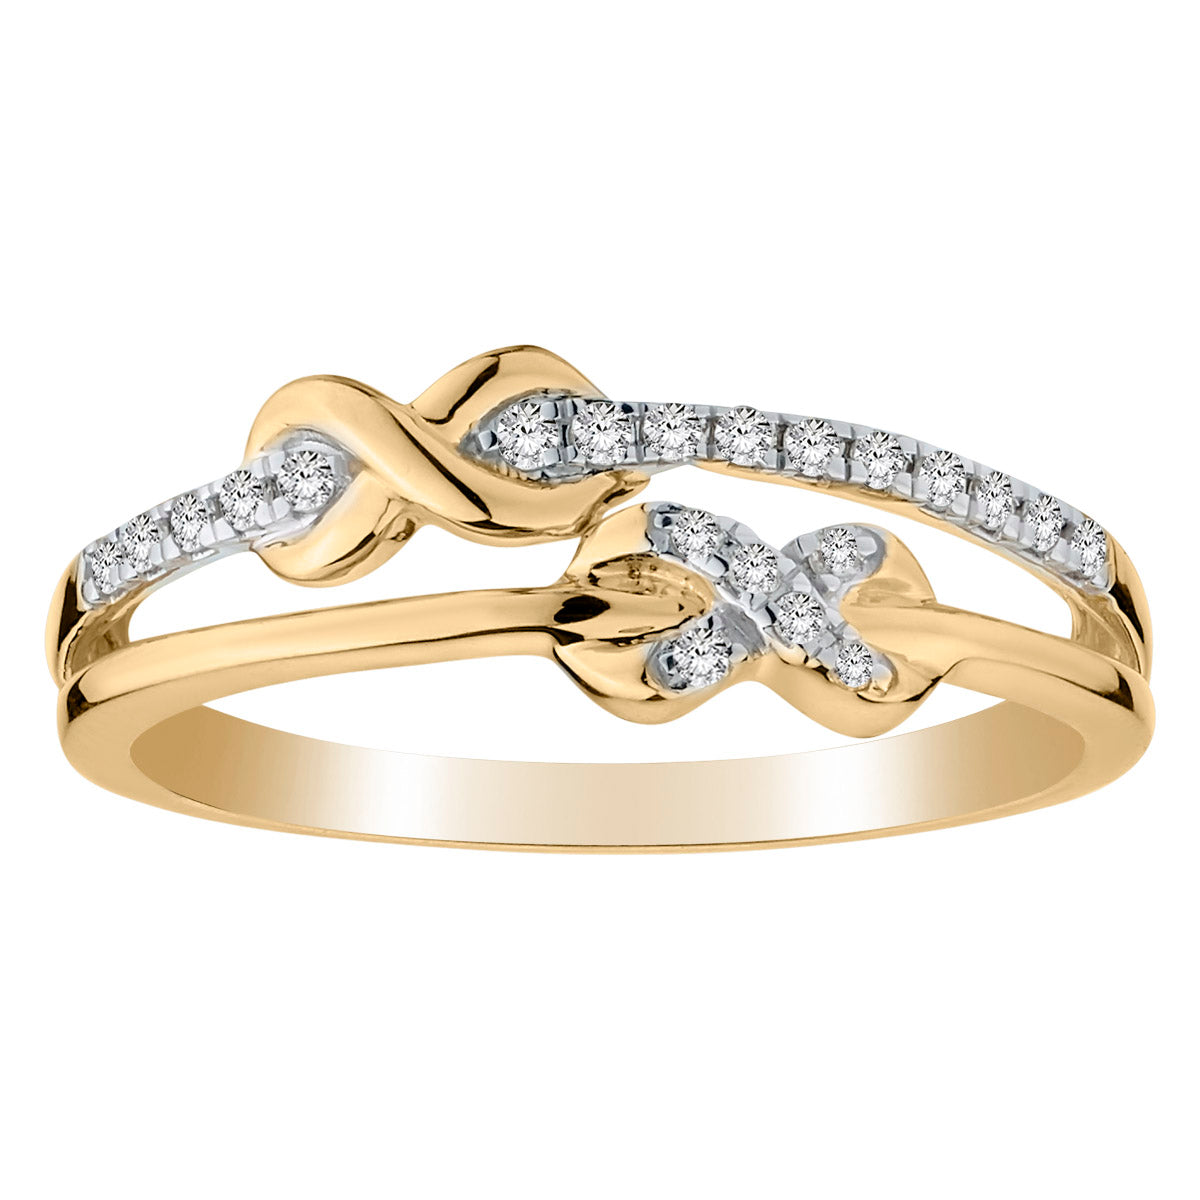 .12 Carat of Diamonds Double Infinity Ring, 10kt Yellow gold......................NOW